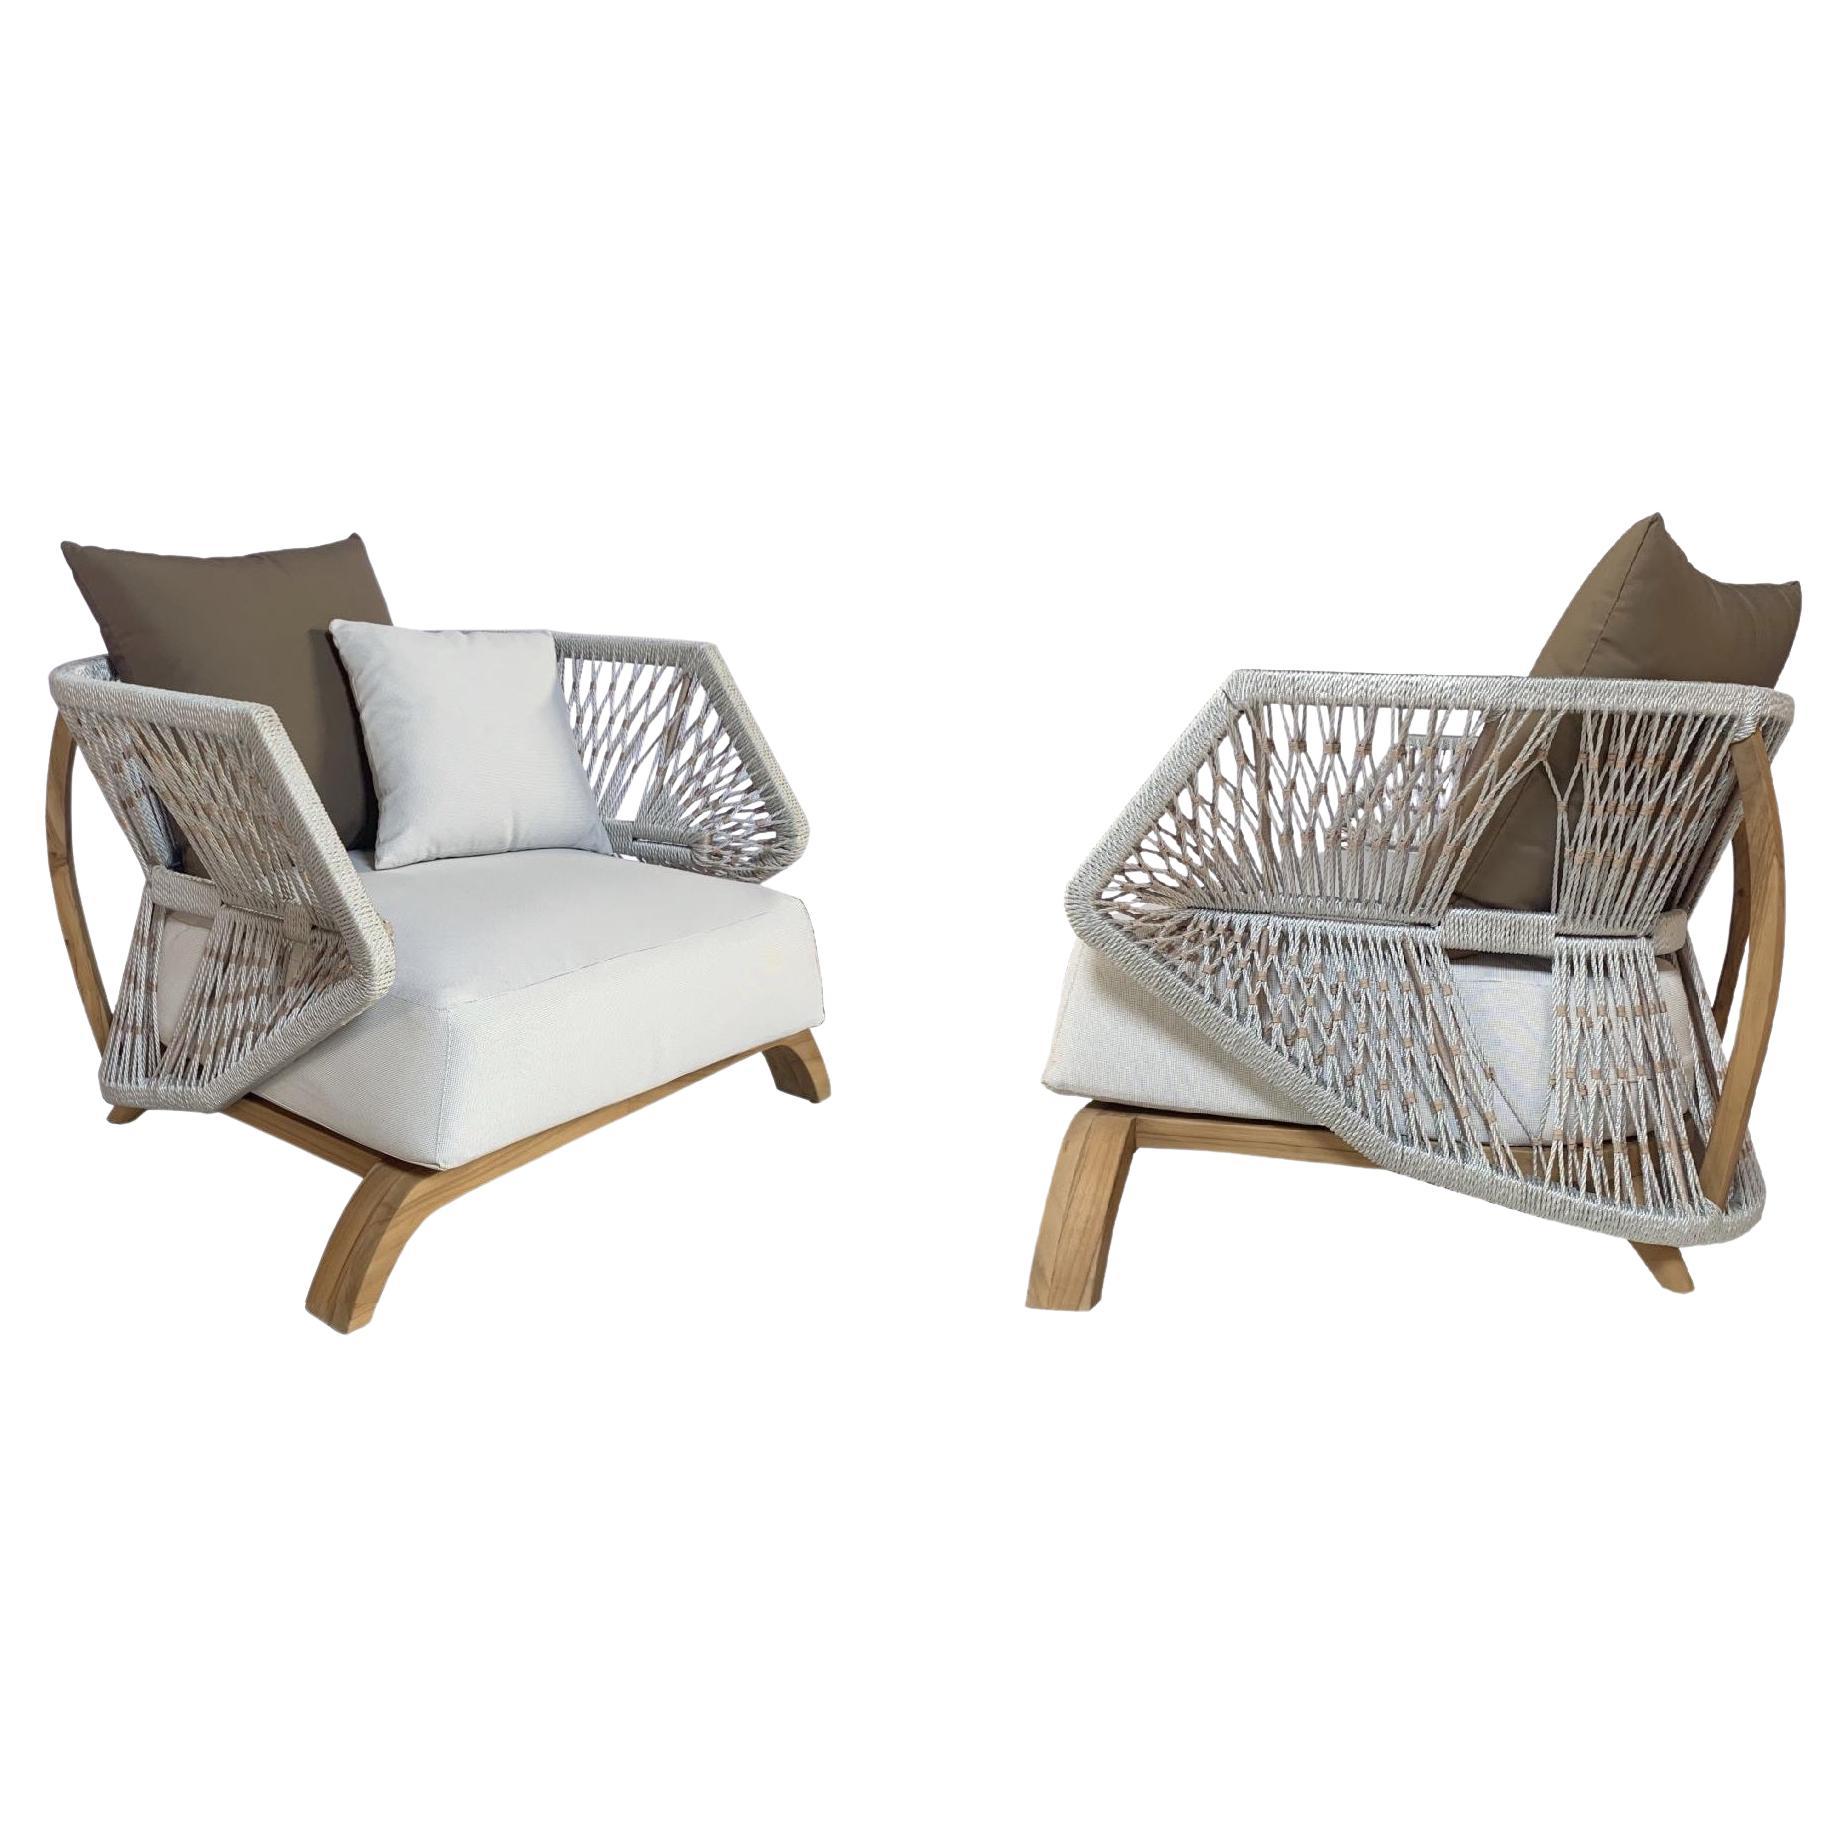 Pair of Outdoor Lounge Chairs in Handwoven Rope & Solid Teak For Sale